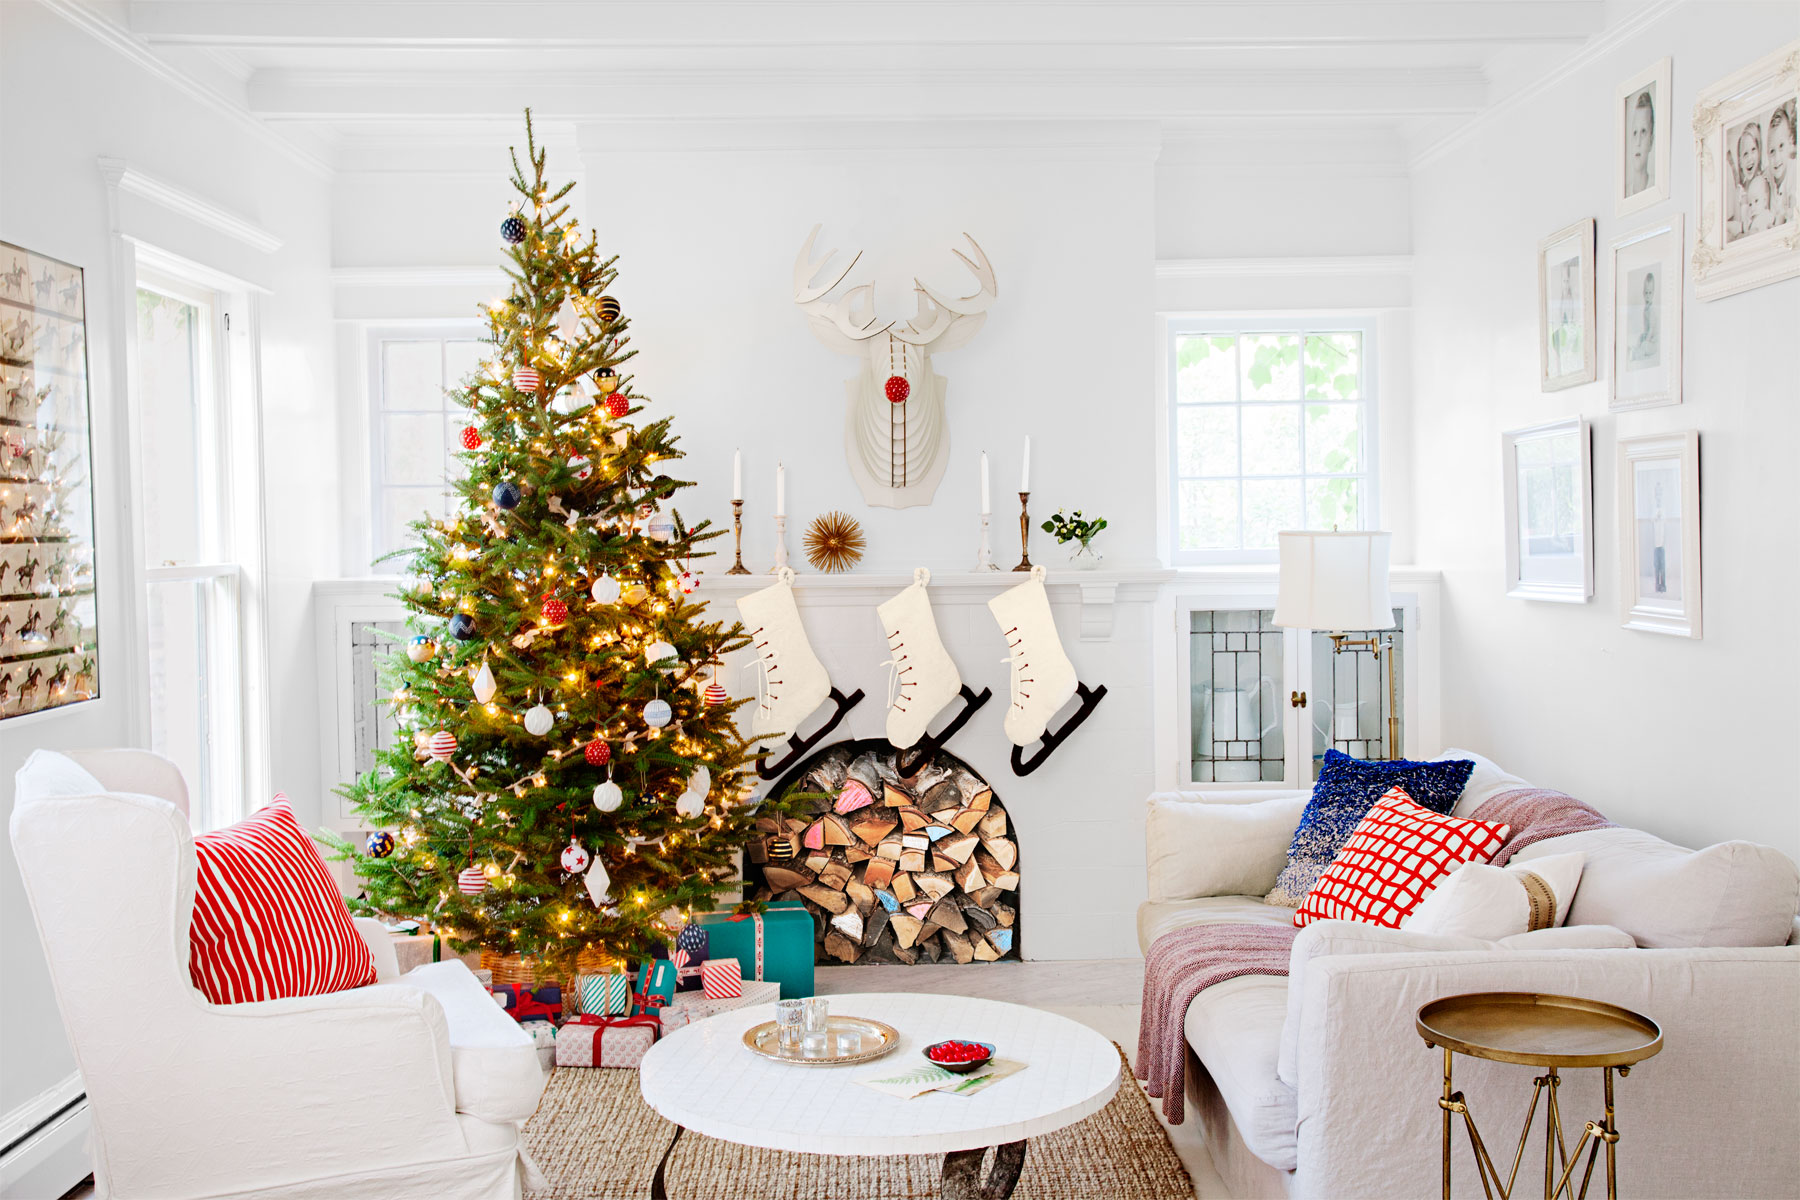 Here are some ideas on Christmas decor for mantels that you should keep in mind for the upcoming weeks...